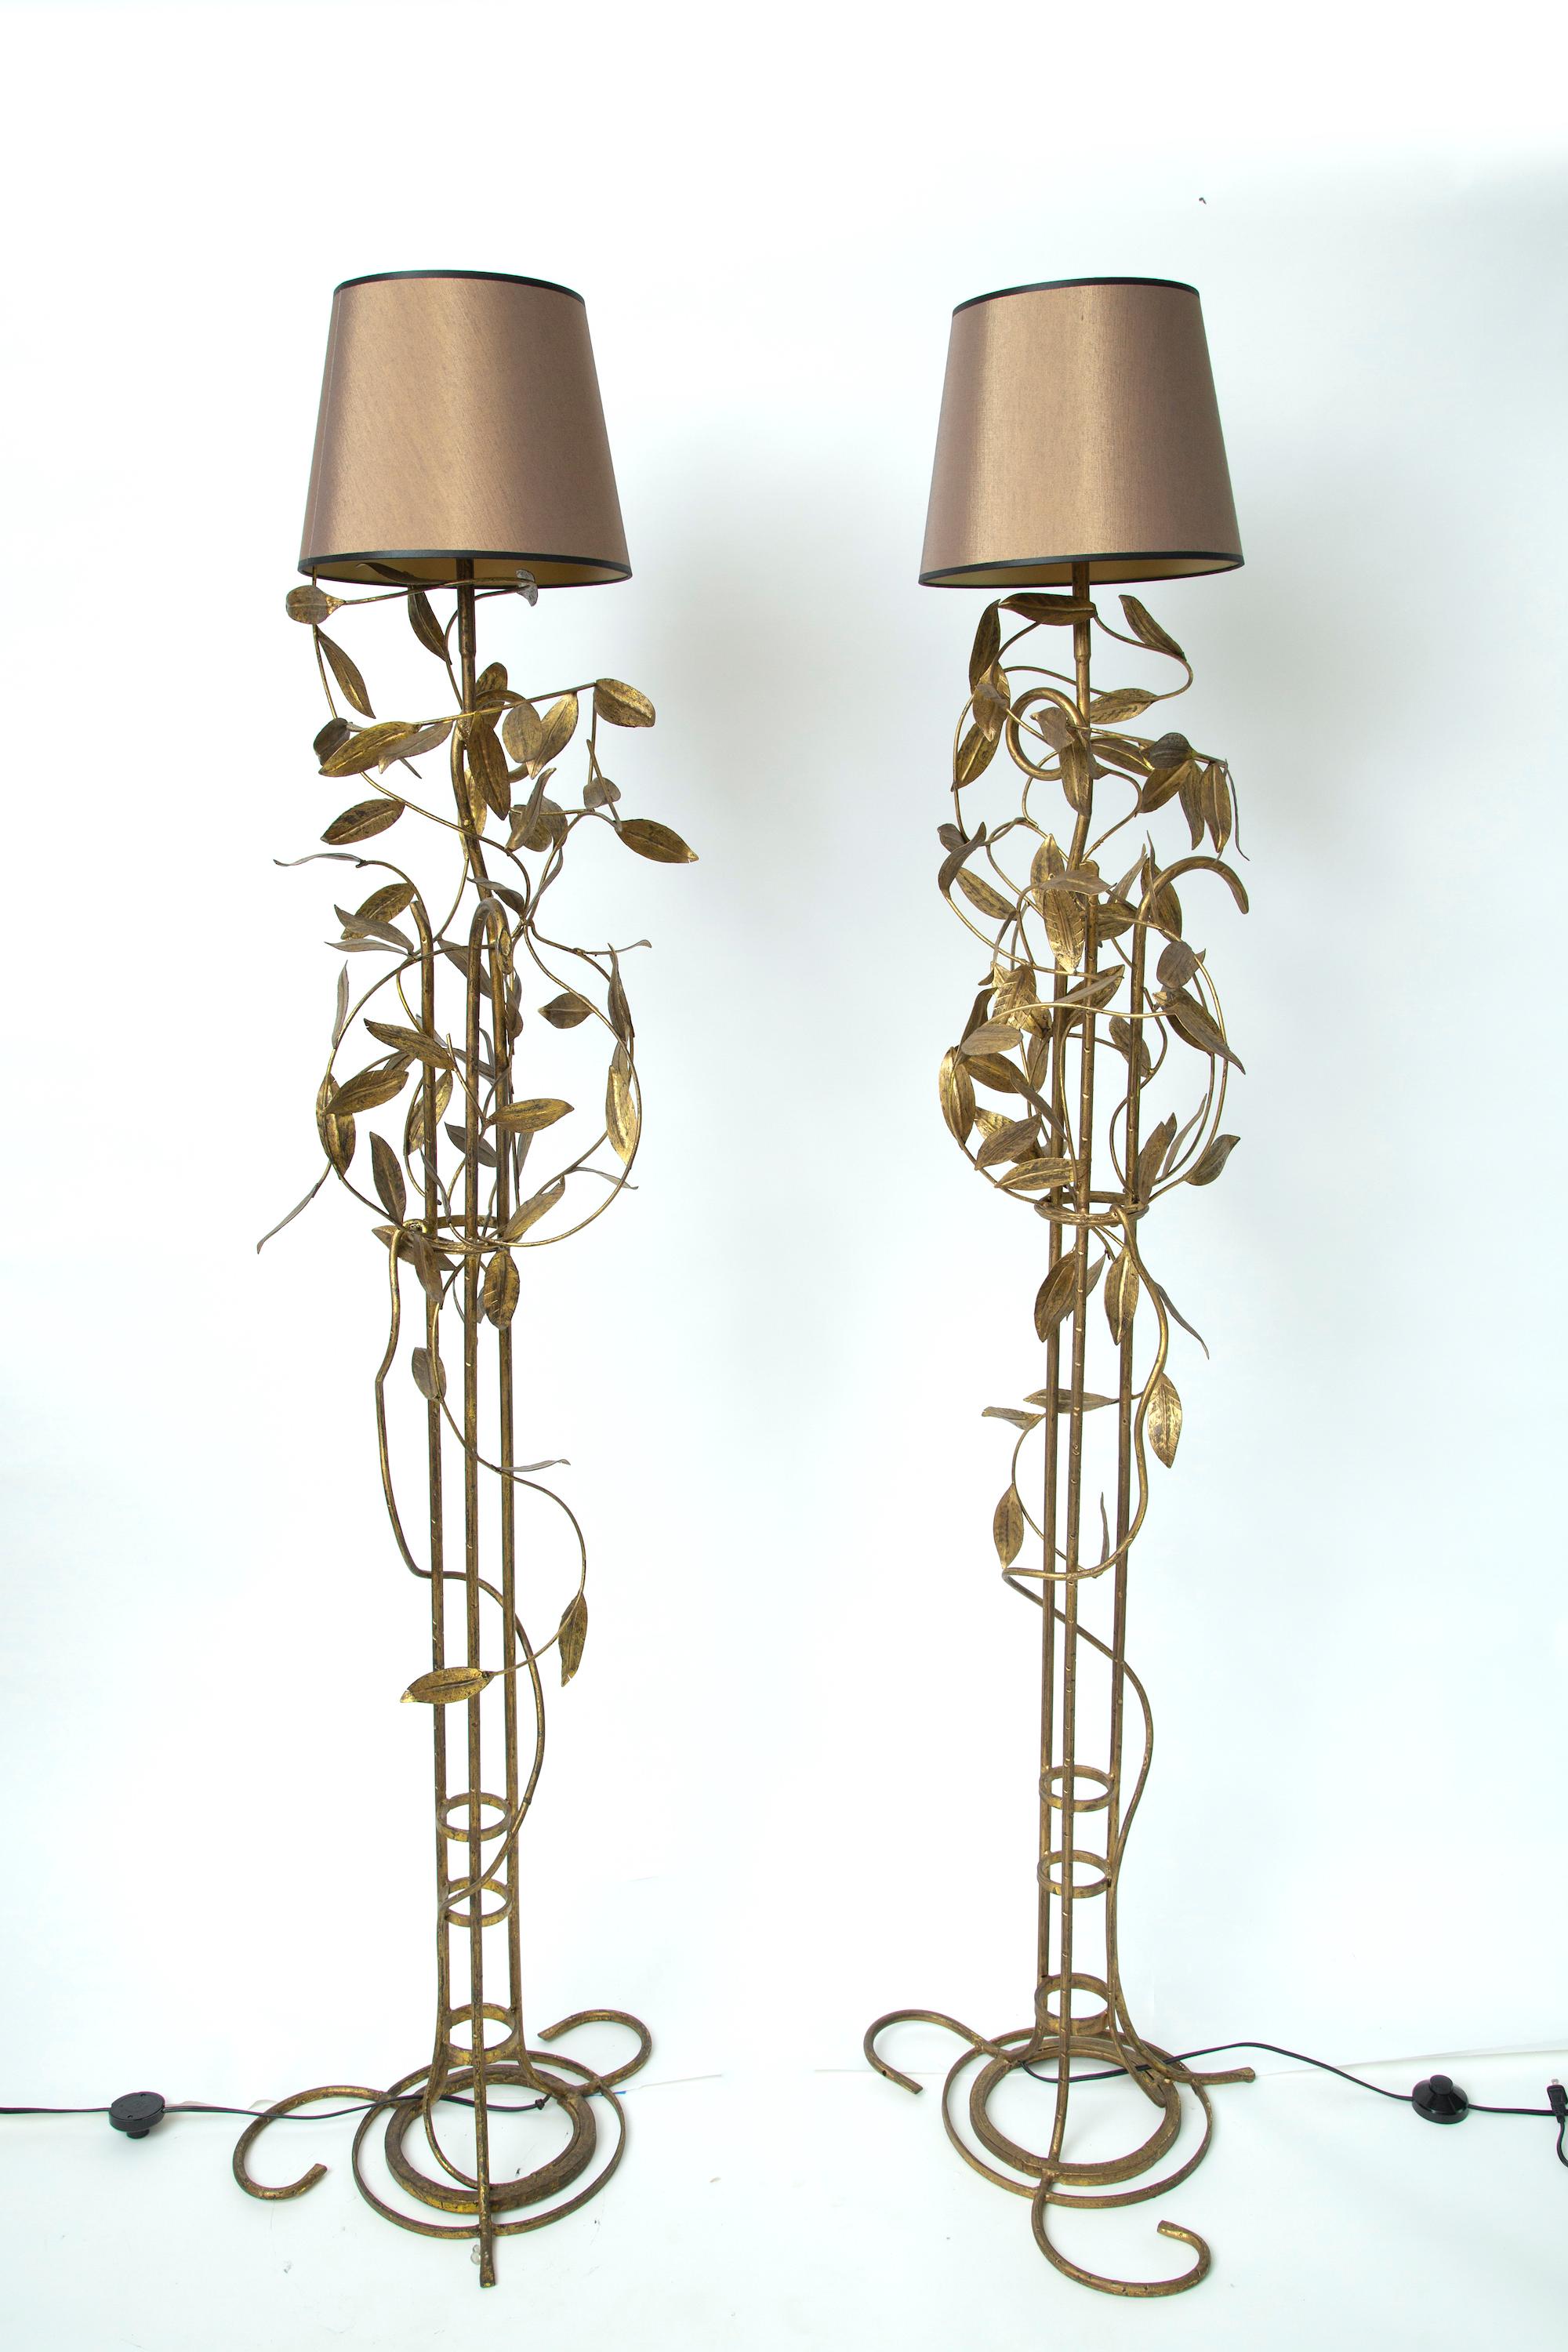 Large scale lamps.
Decorative details include leaves and a birds nest.
Original shades.